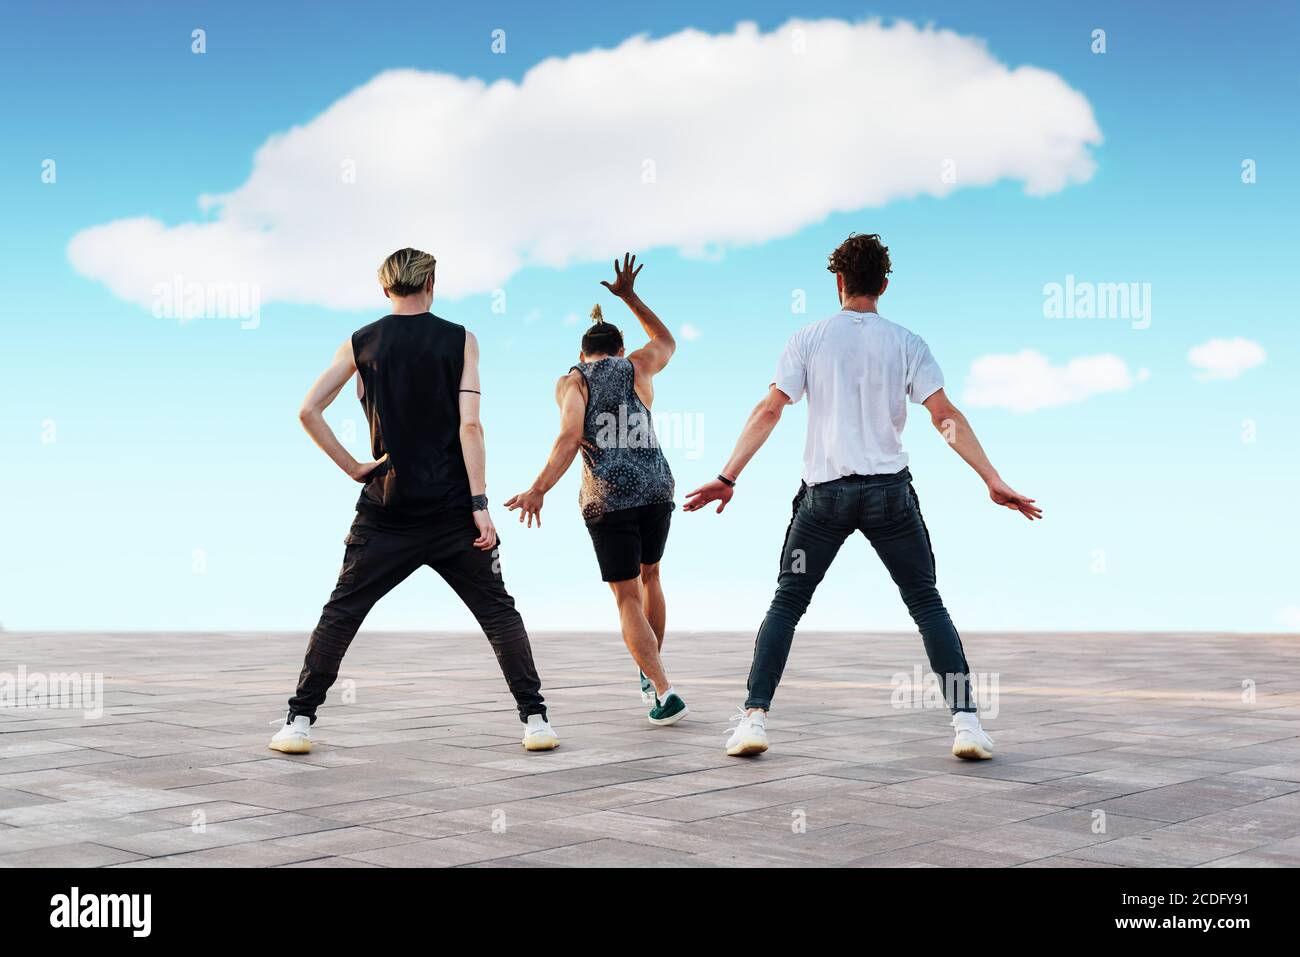 Three unrecognizable young men dancing sport dances, hip-hop or break-dance outdoors. Teenage lifestyle and urban youth culture concept. Street dance. Stock Photo